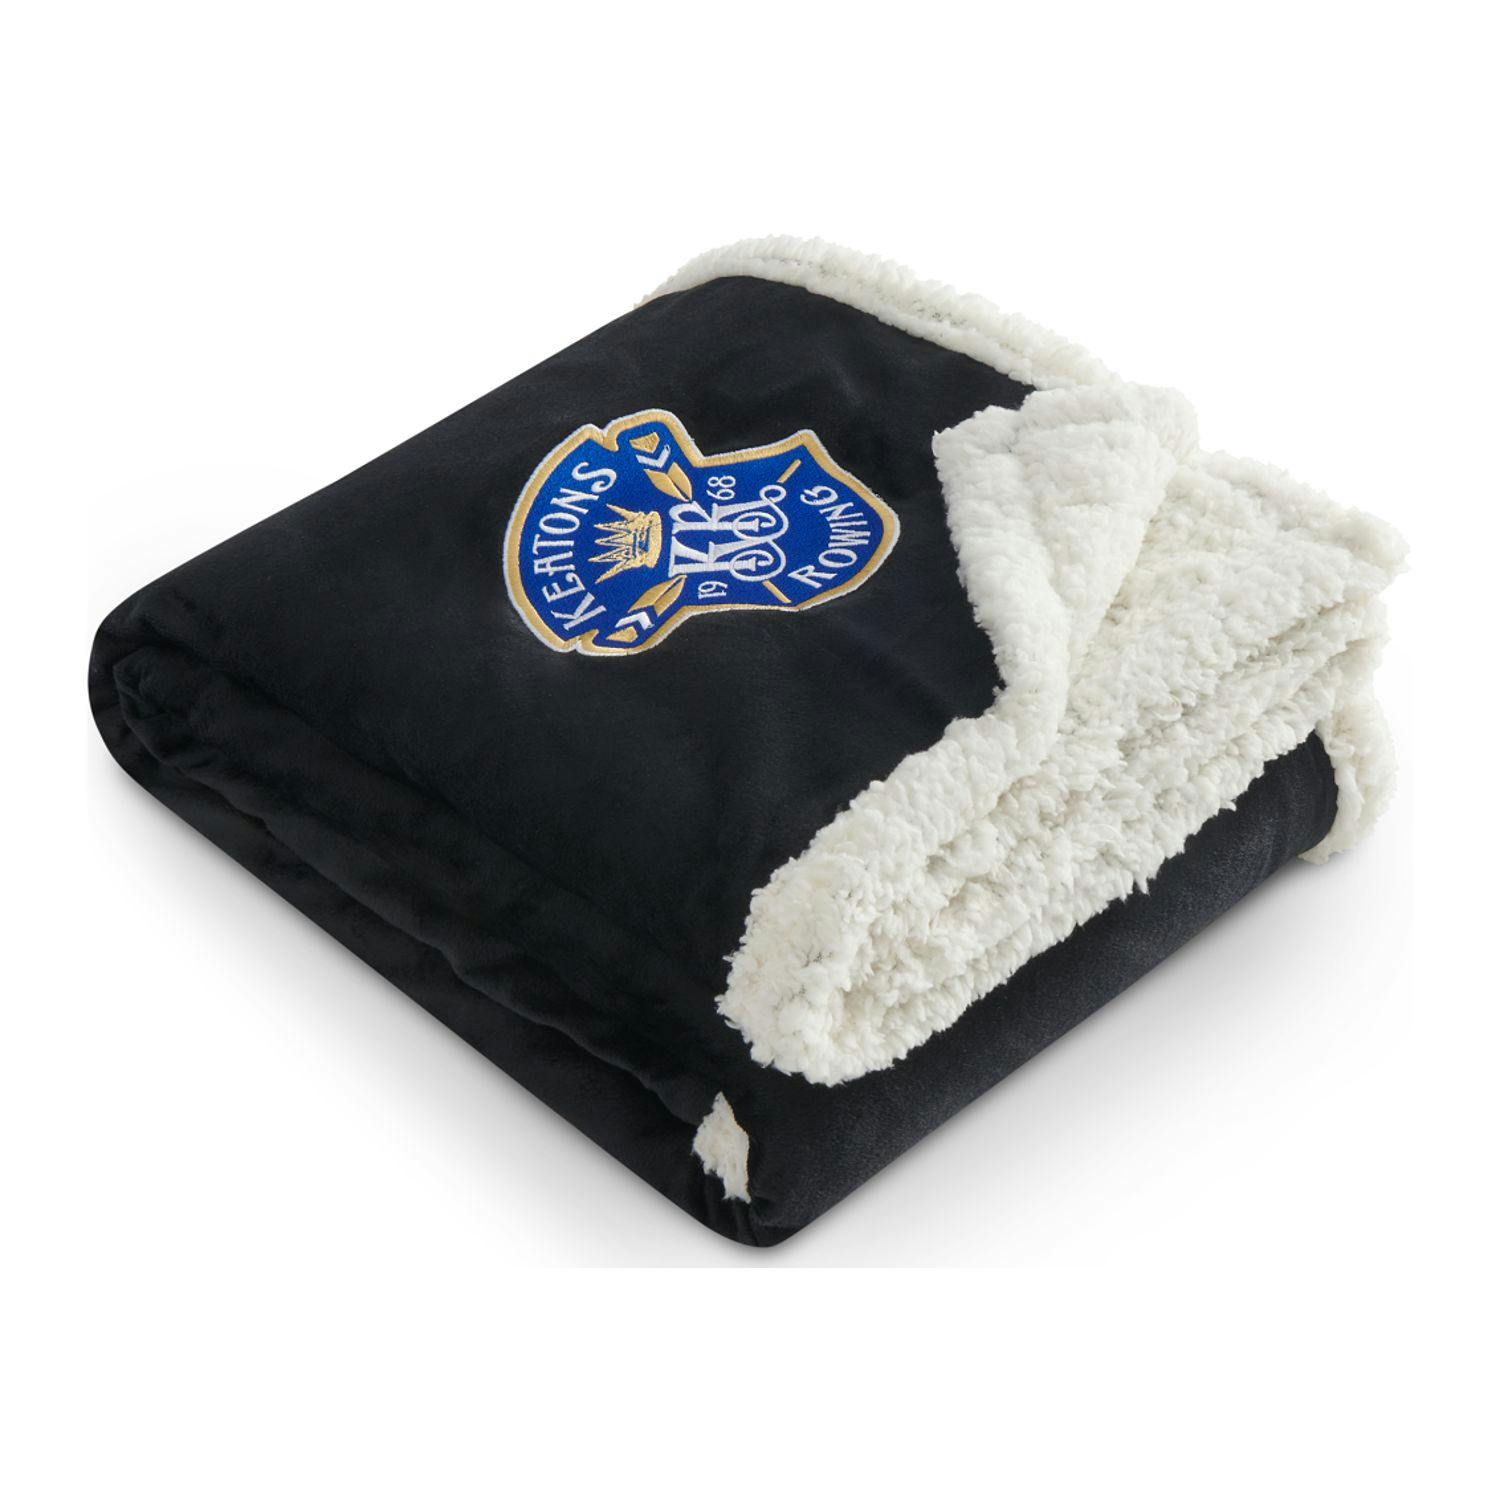 Field & Co. 100% Recycled PET Sherpa Blanket - additional Image 1